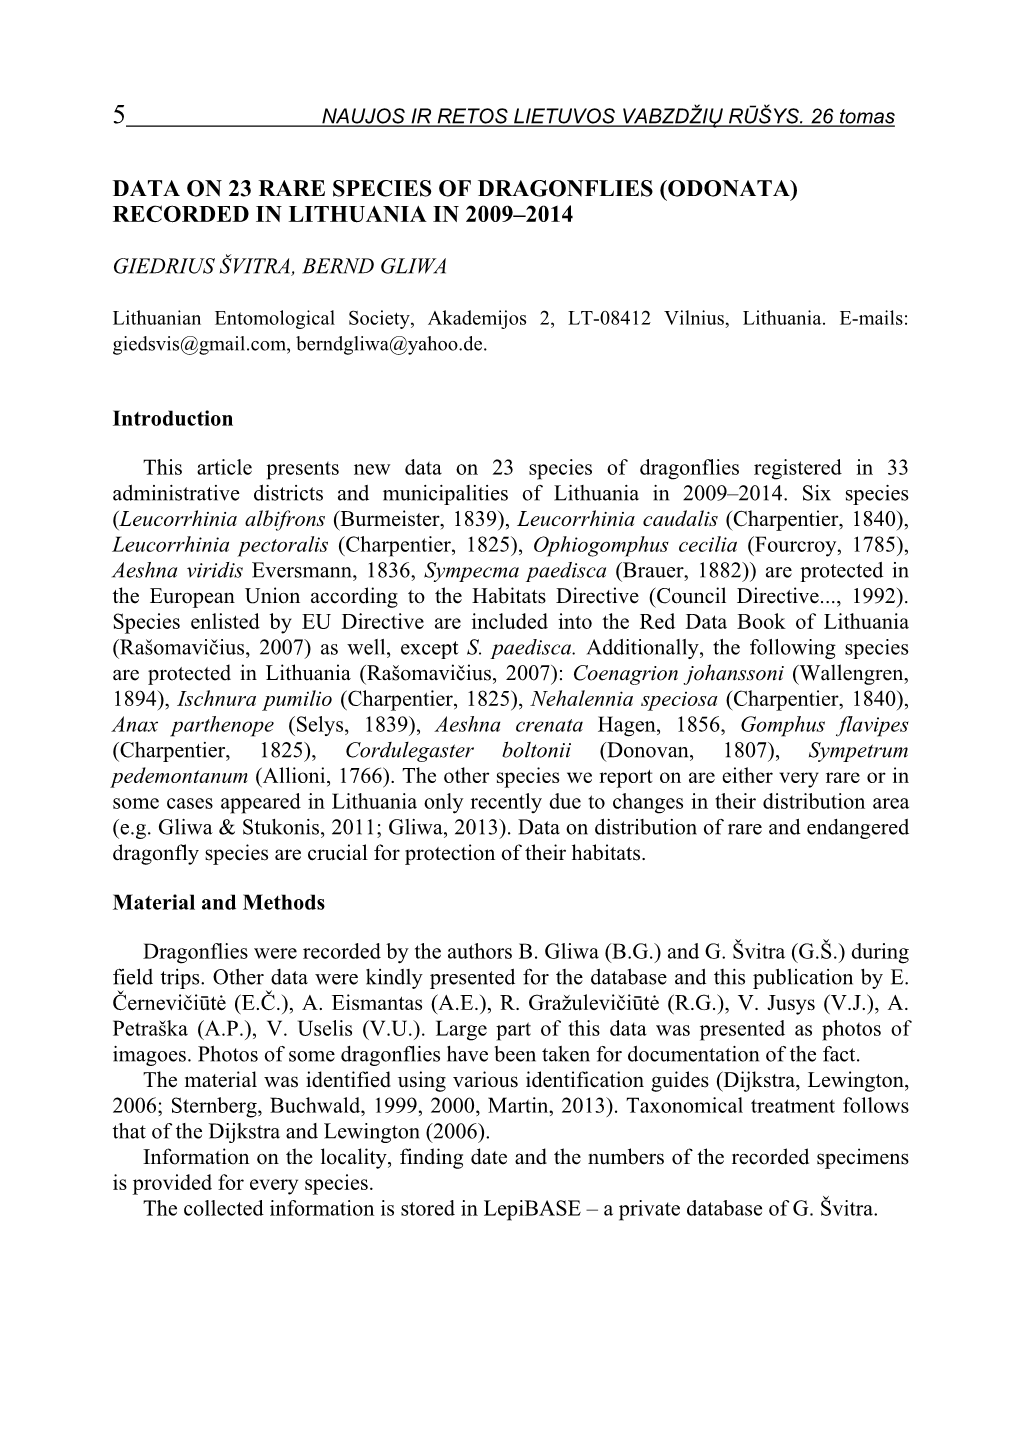 Checklist of Lithuanian Diptera